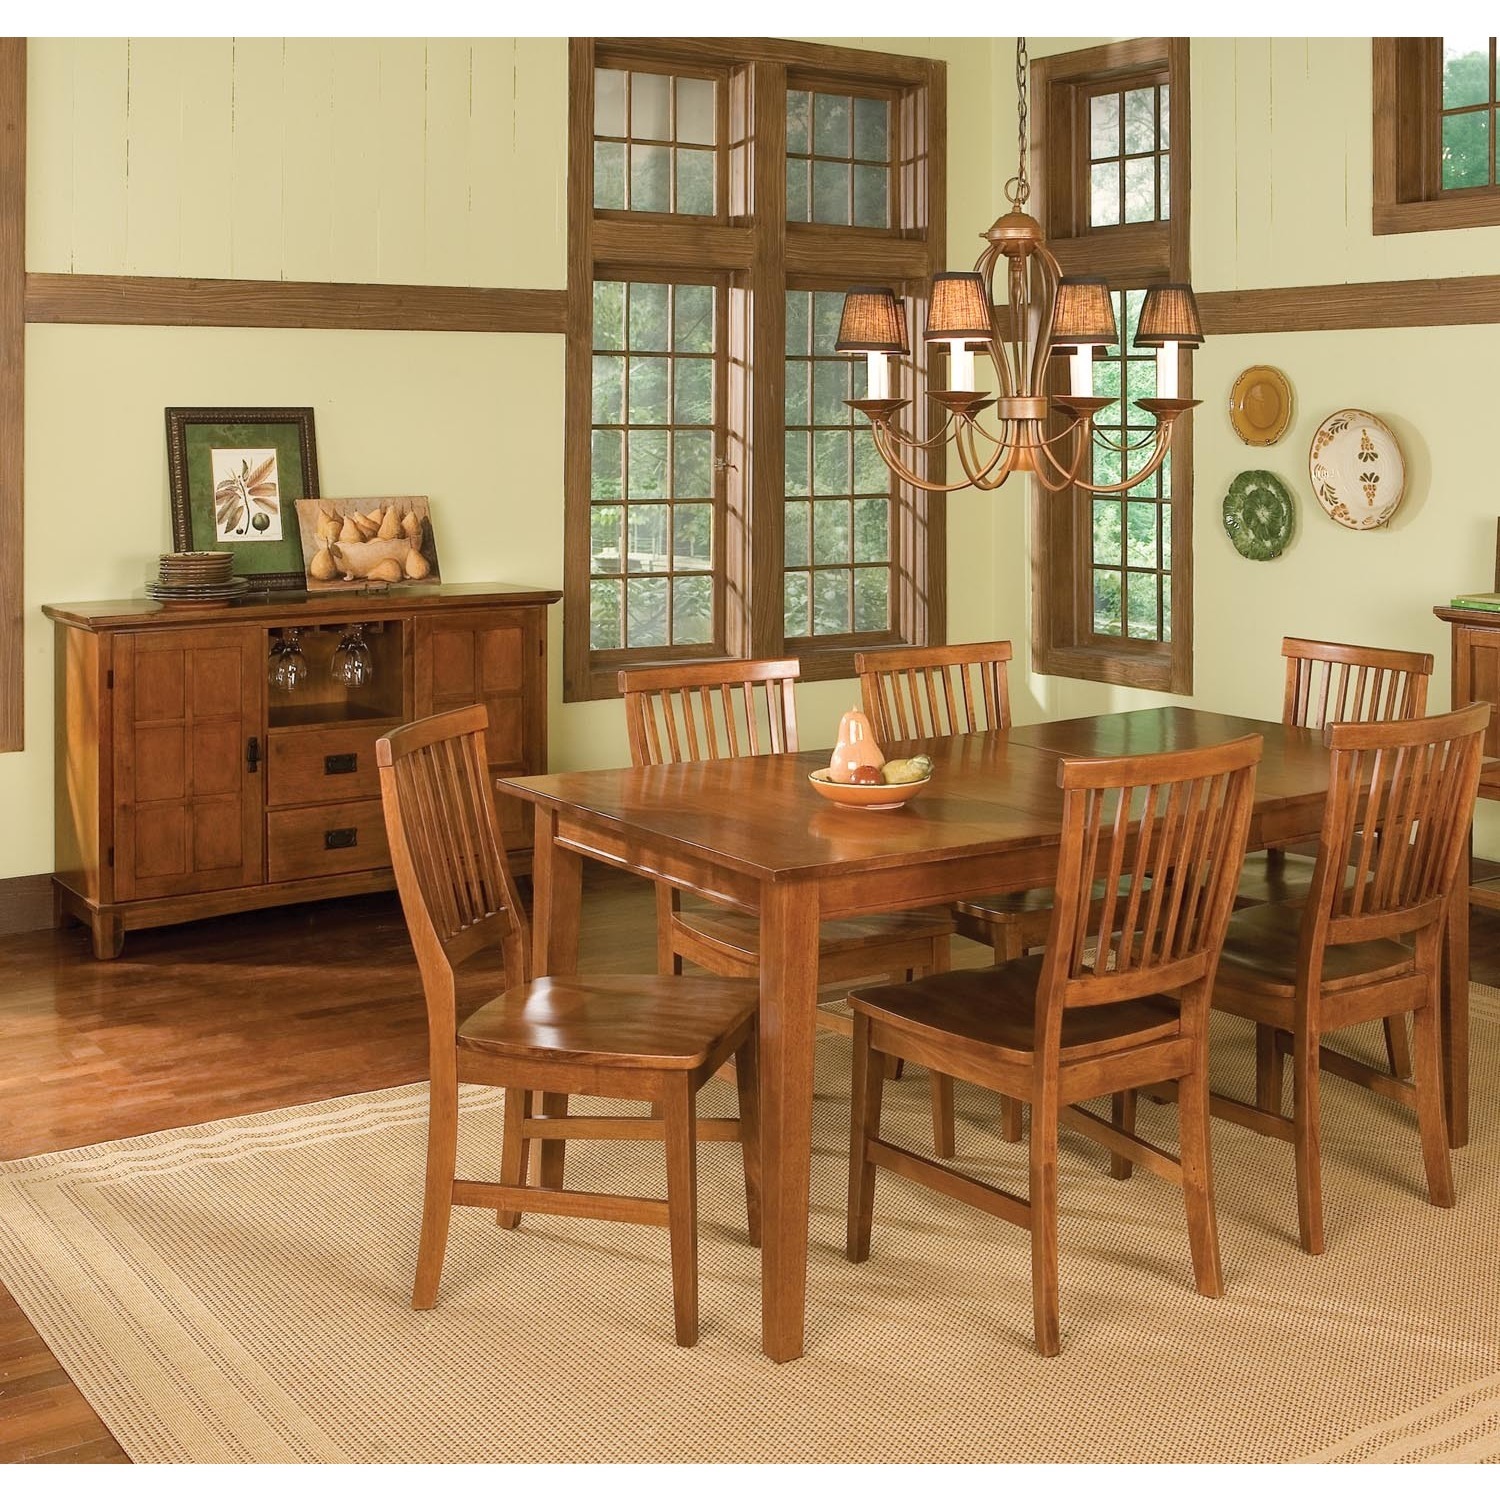 Shop Arts and Crafts 7-piece Rectangular Dining Set by ...